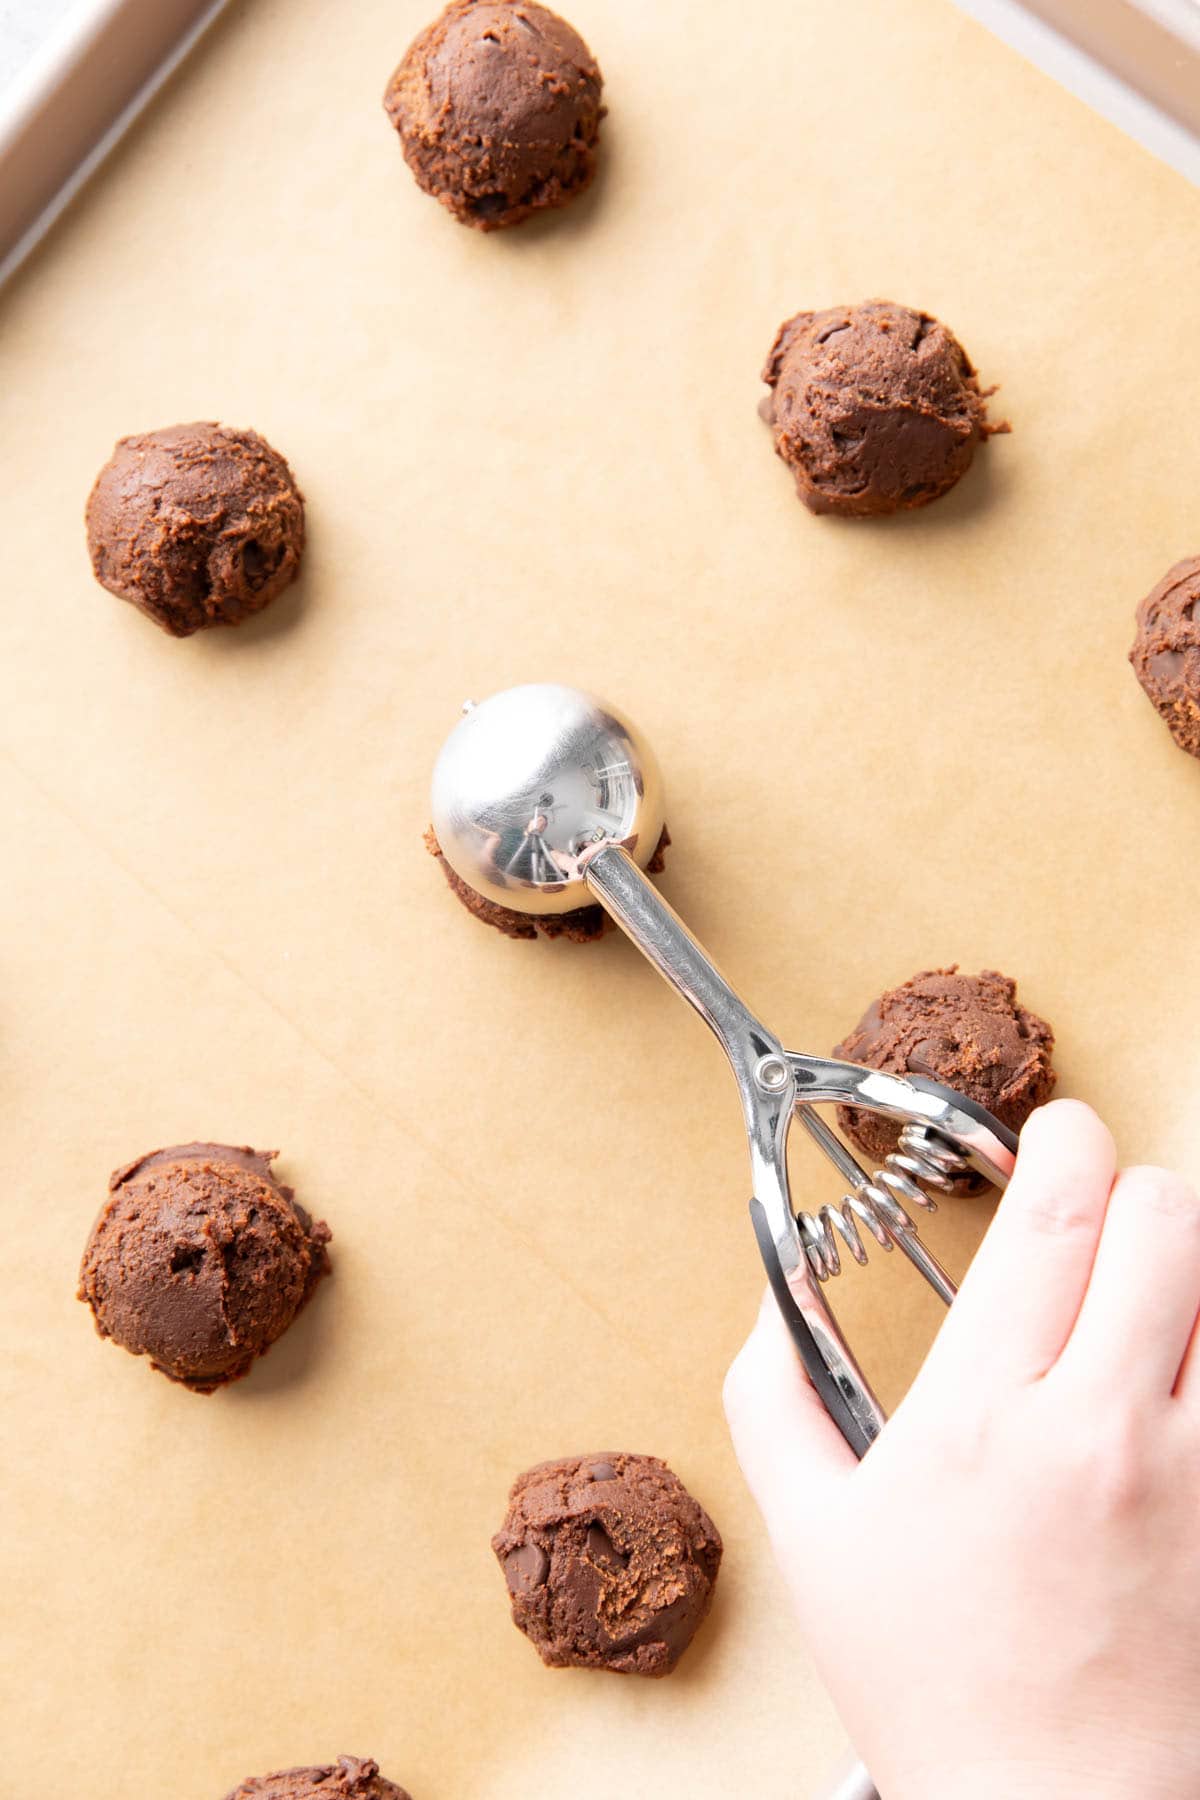 Two photos showing How to Make this chocolate baked goods – scooping dough onto lined baking sheet to bake